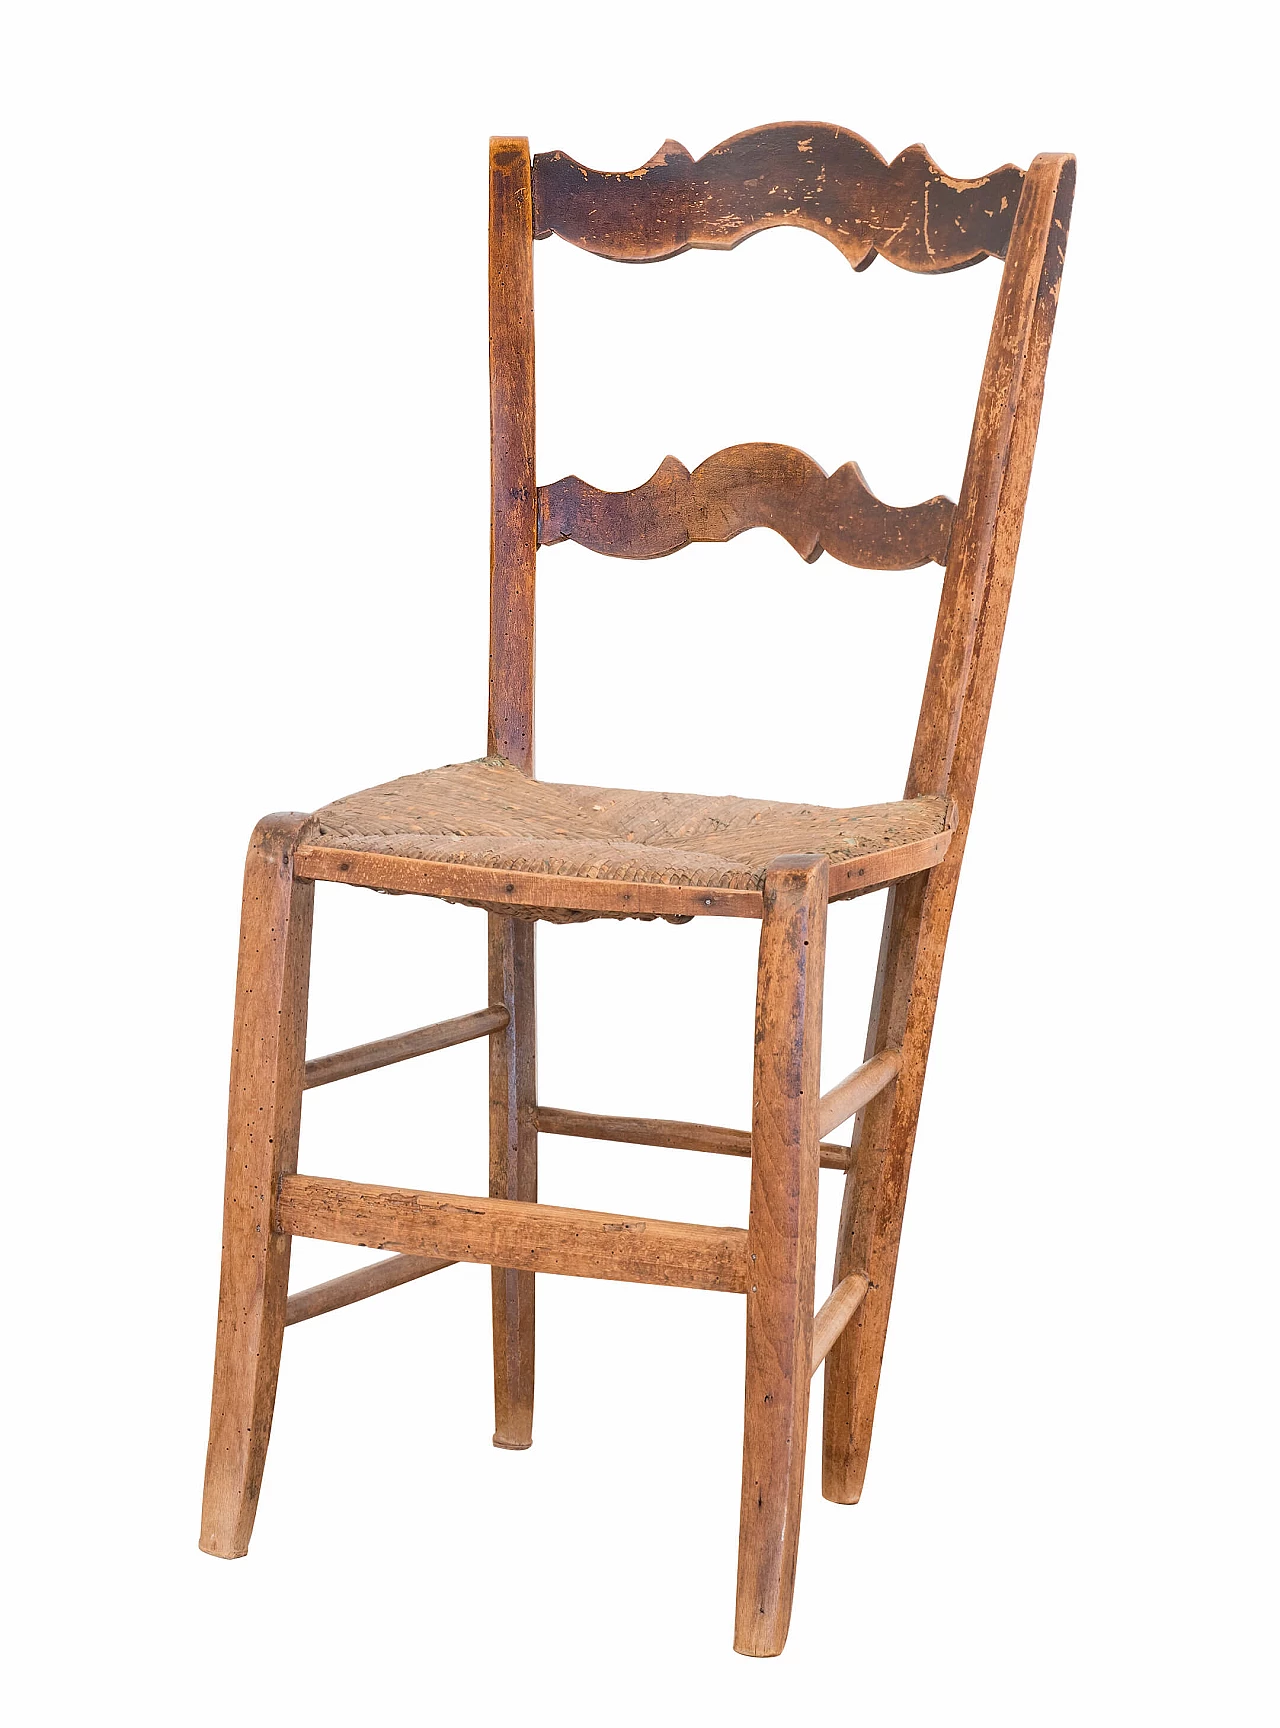 Rustic chair with sabre legs 1084844